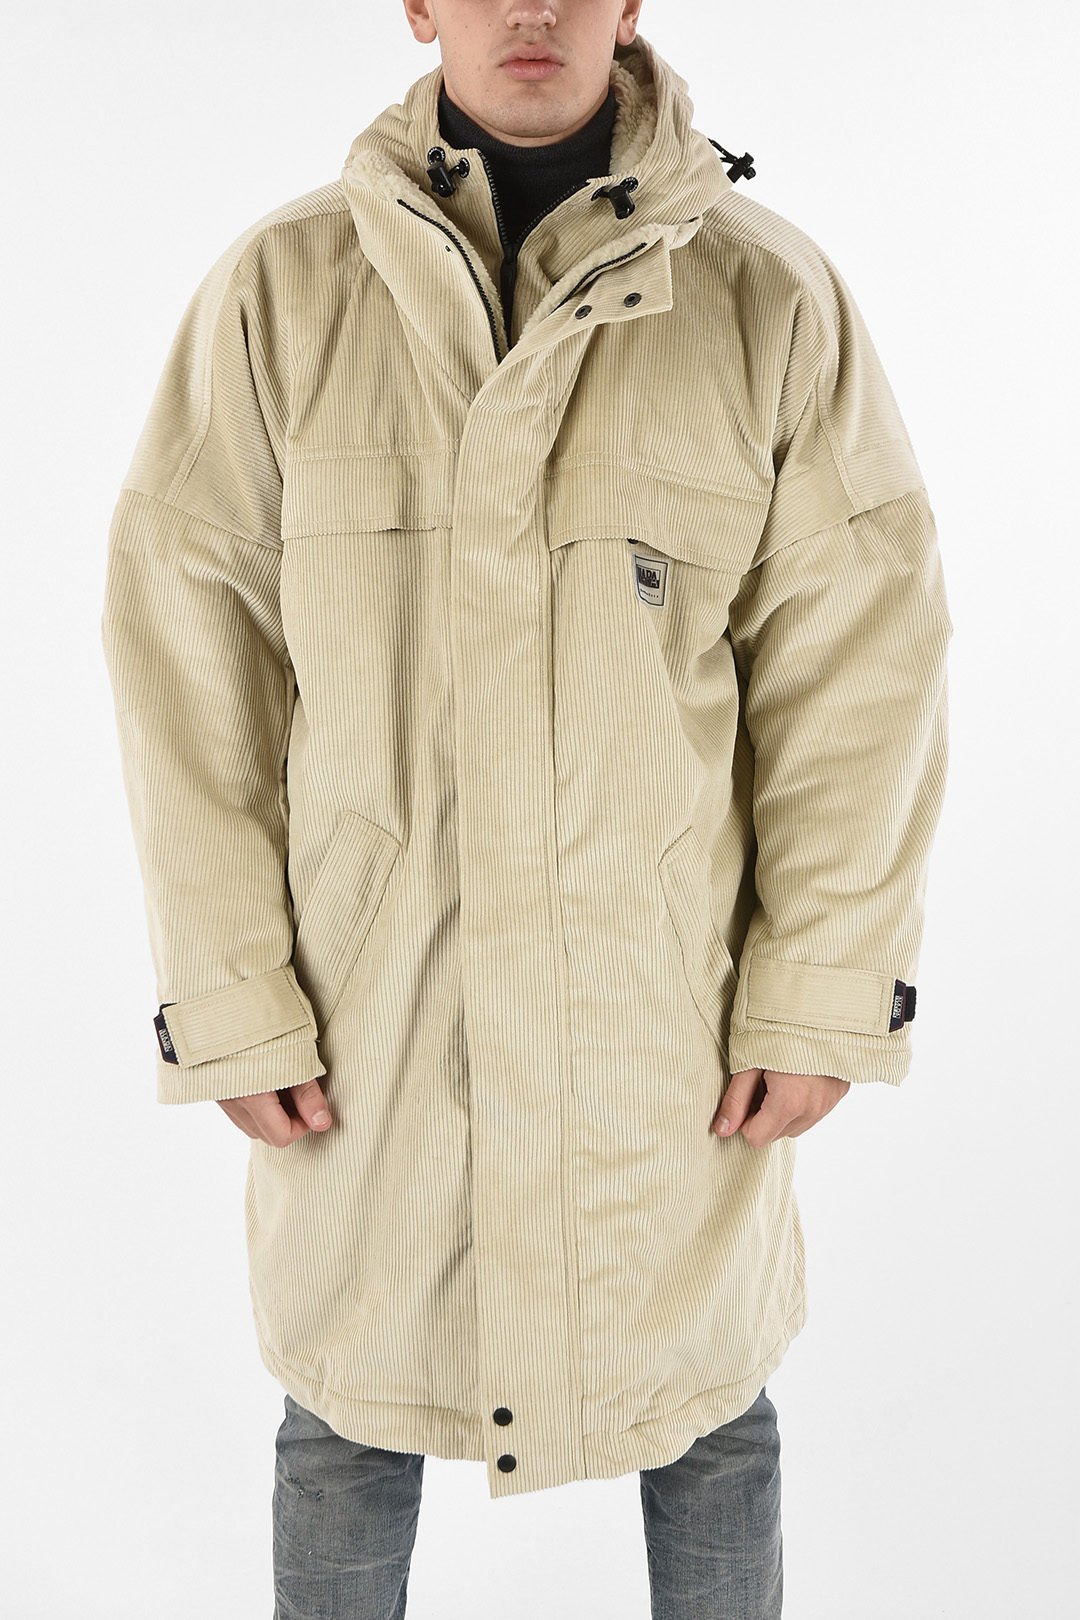 MARTINE ROSE corduroy A-PEALE hooded outerwear